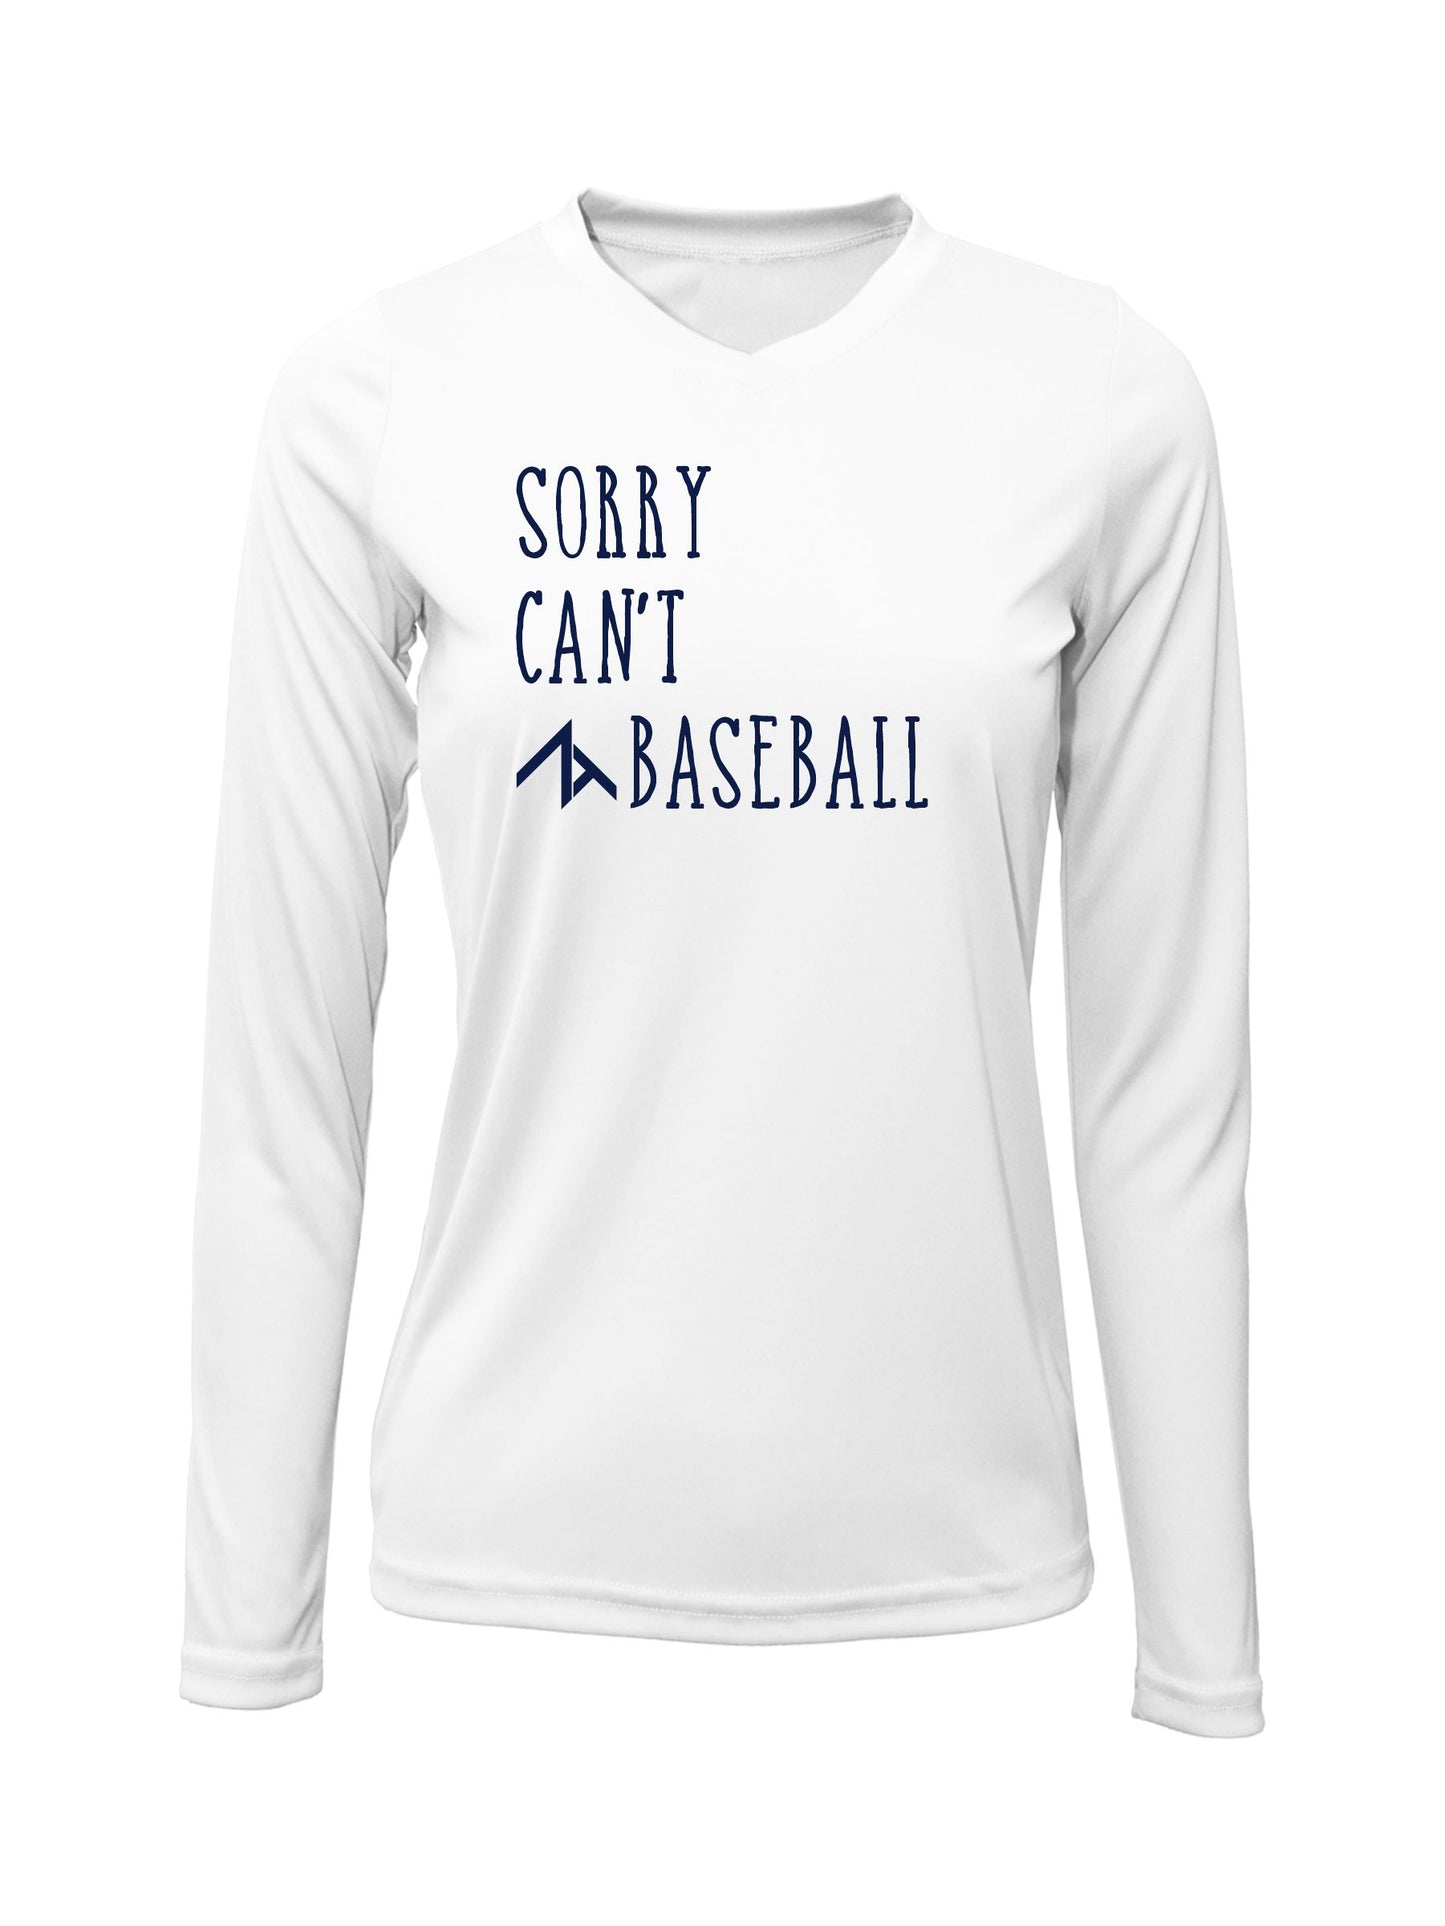 V-Neck Long Sleeve "SORRY CAN'T" Dri-Fit T-shirt